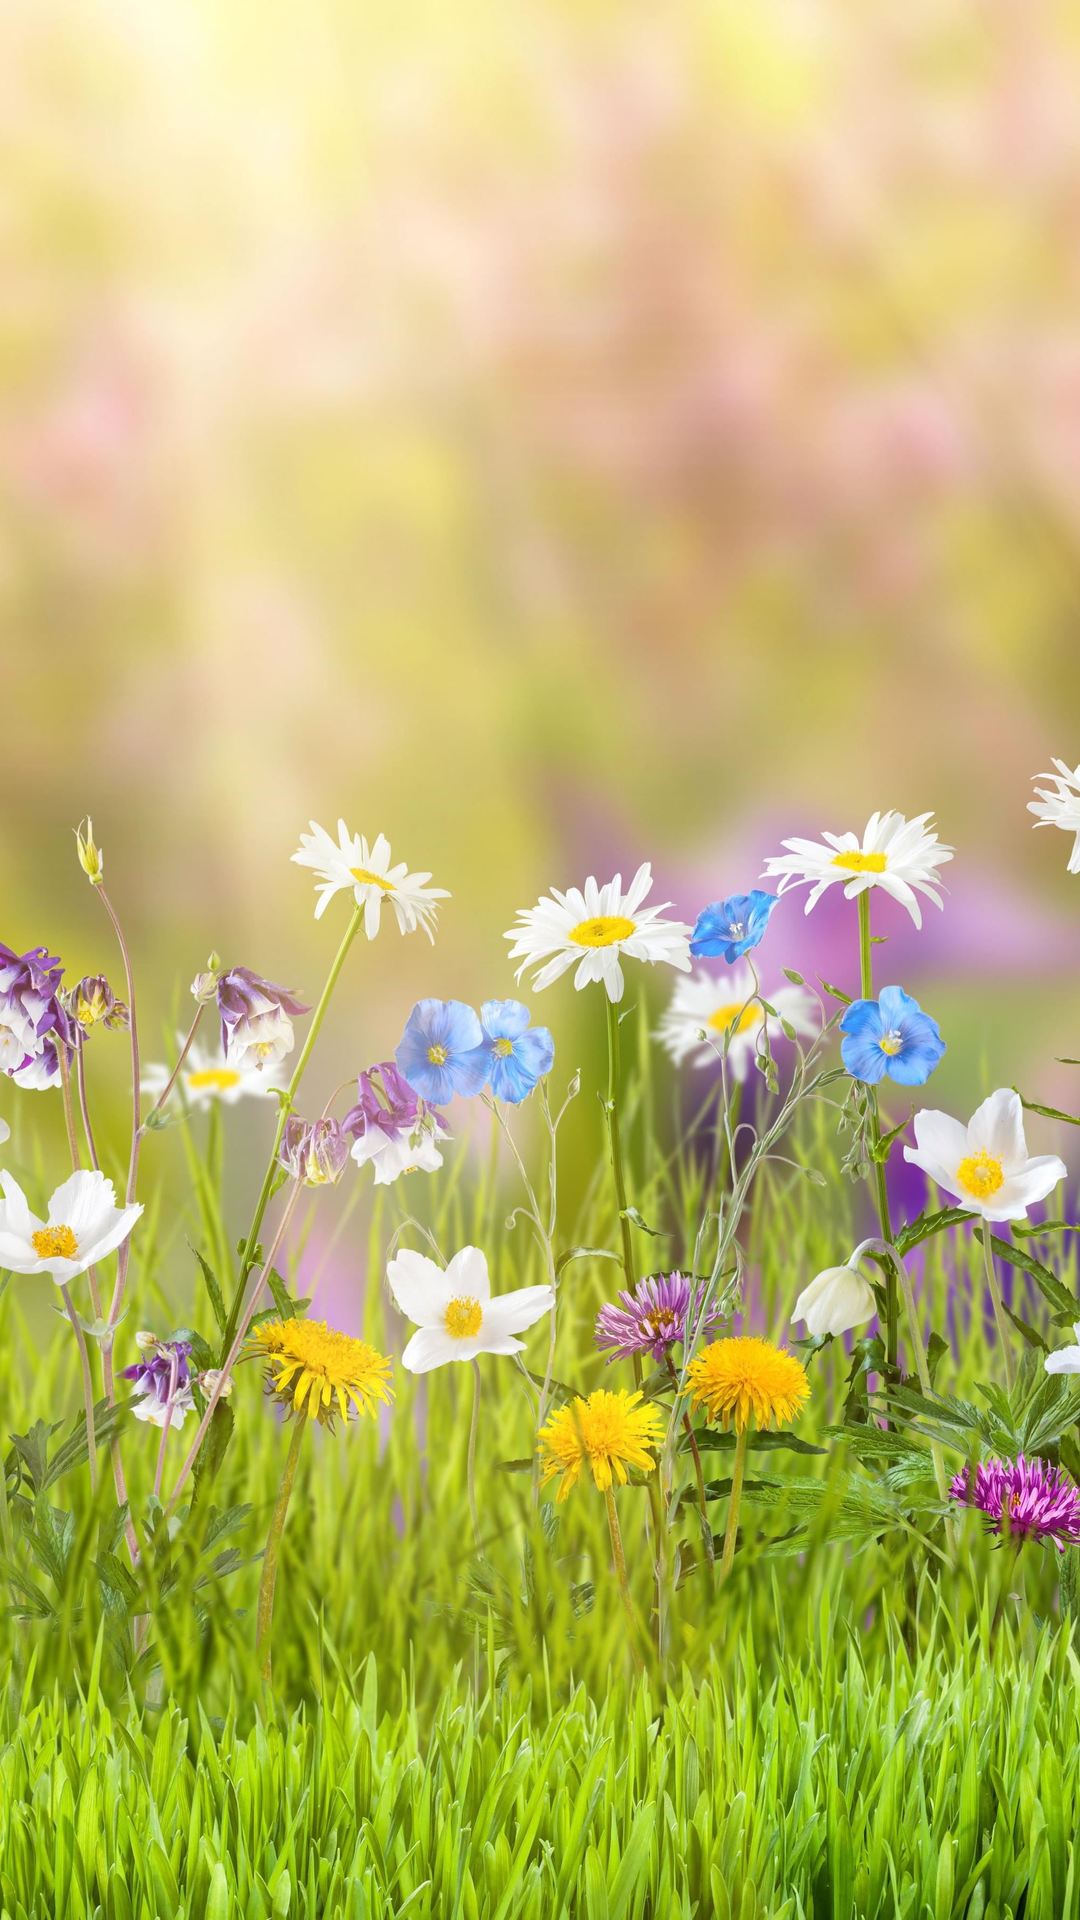 Spring Iphone Wallpapers, Amazing Iphone Wallpapers, - Flower Field Facebook Cover - HD Wallpaper 